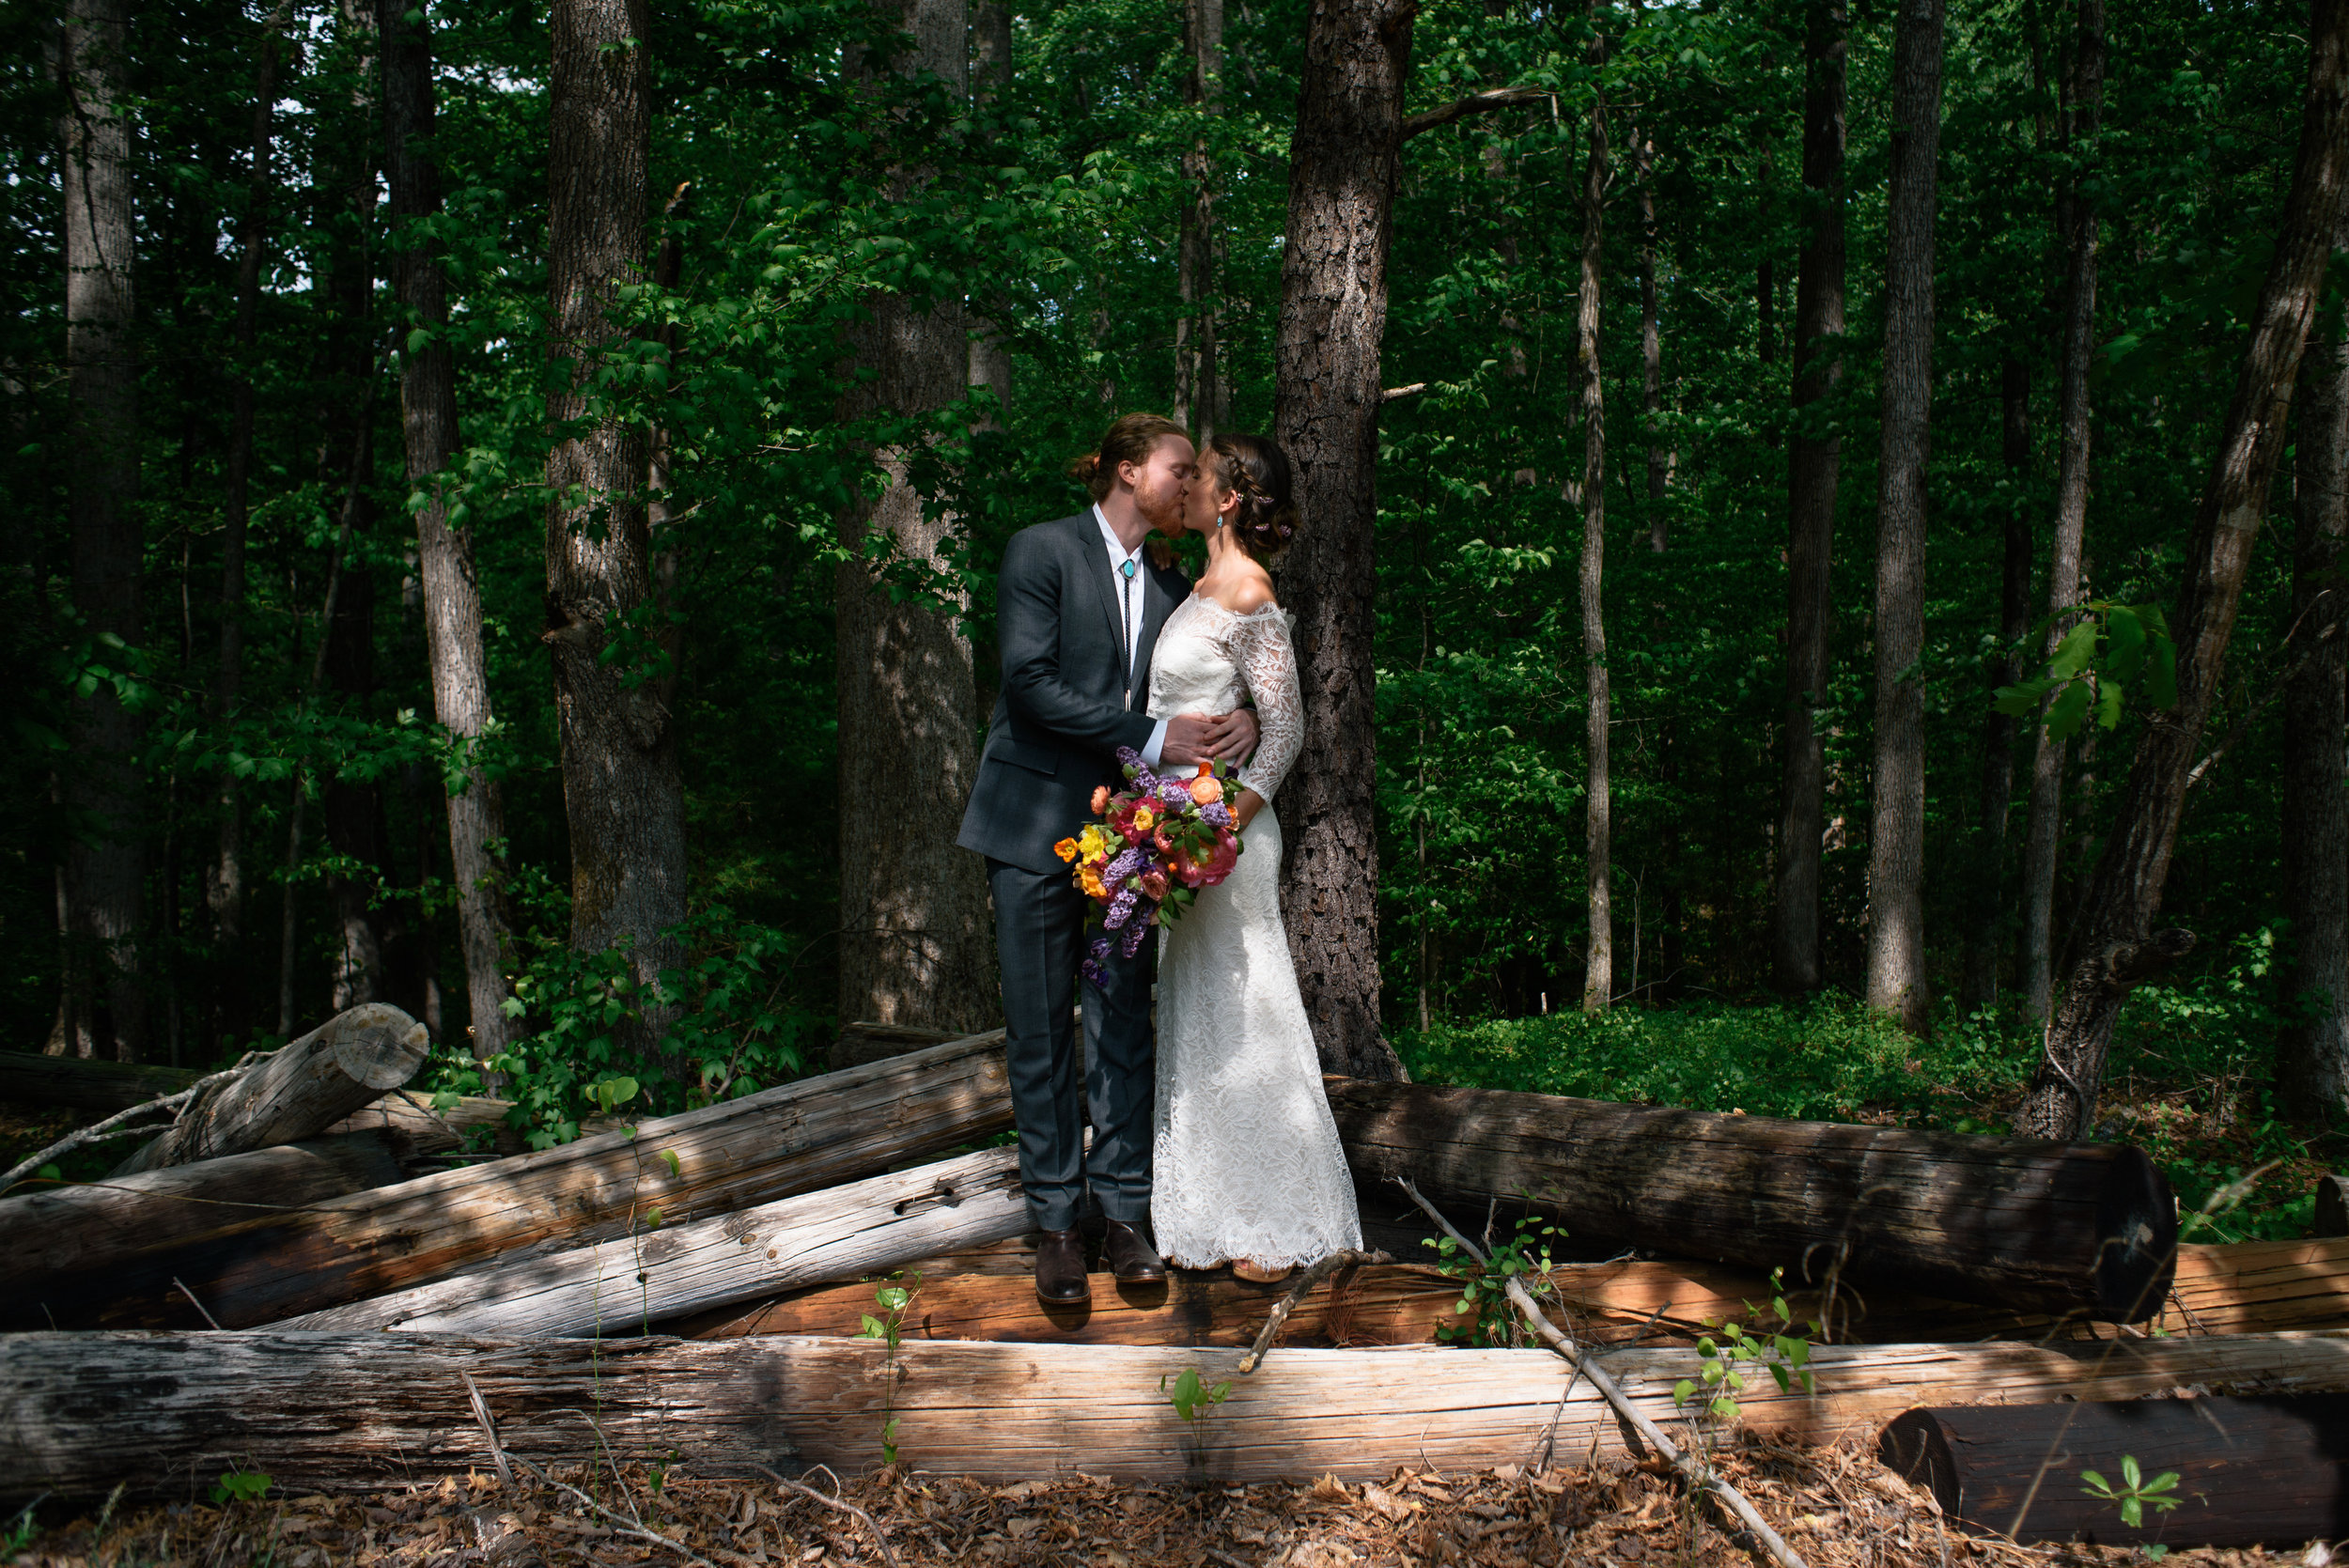 Maddie + Devin's Rustic Raleigh Farm to Table Wedding 